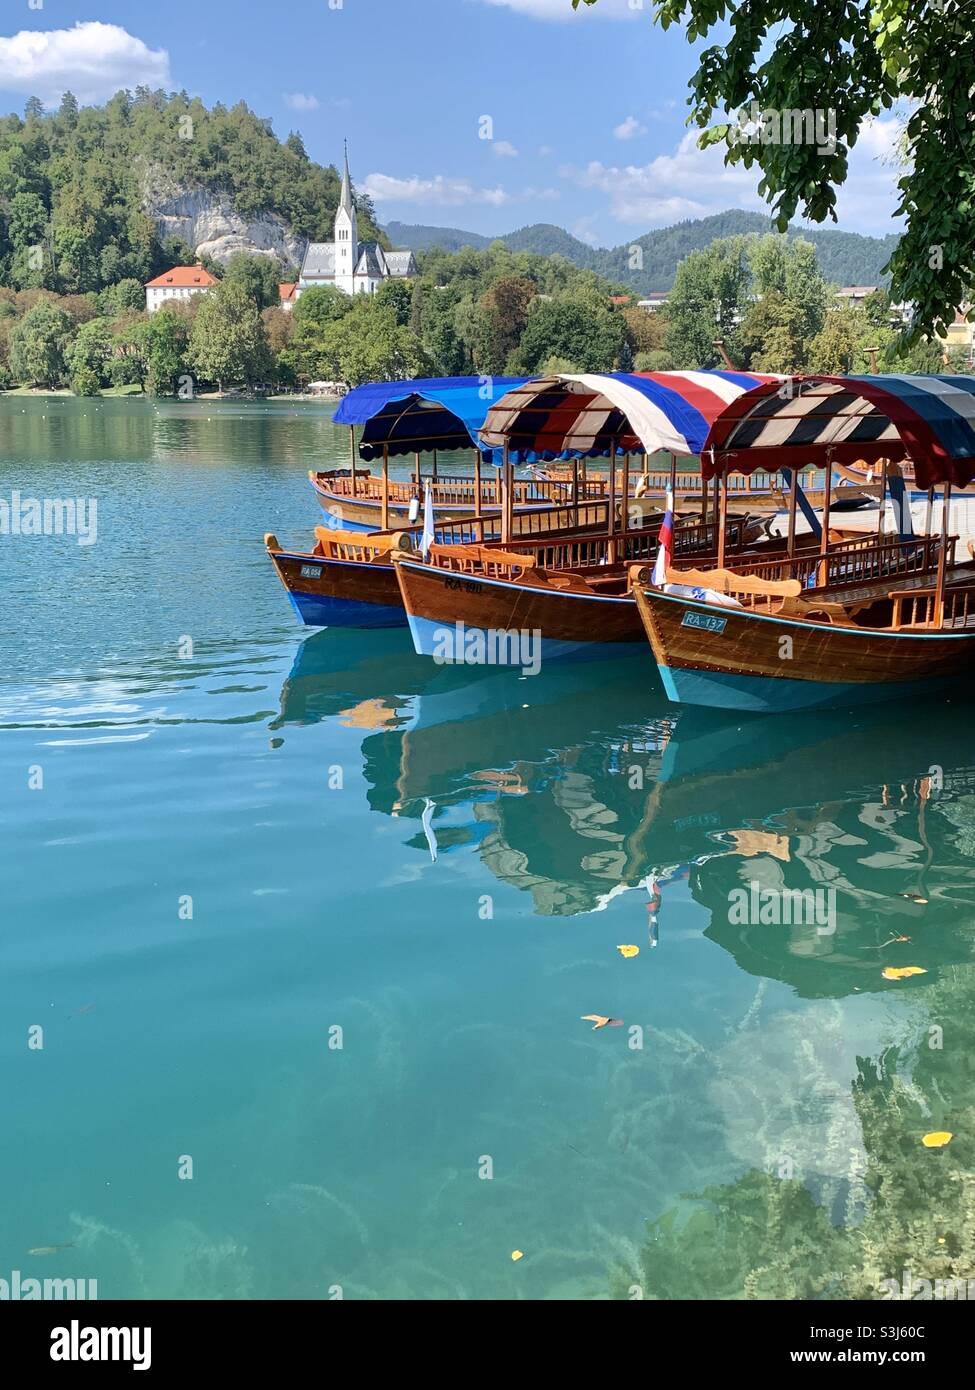 Boats on lake bled Stock Photo